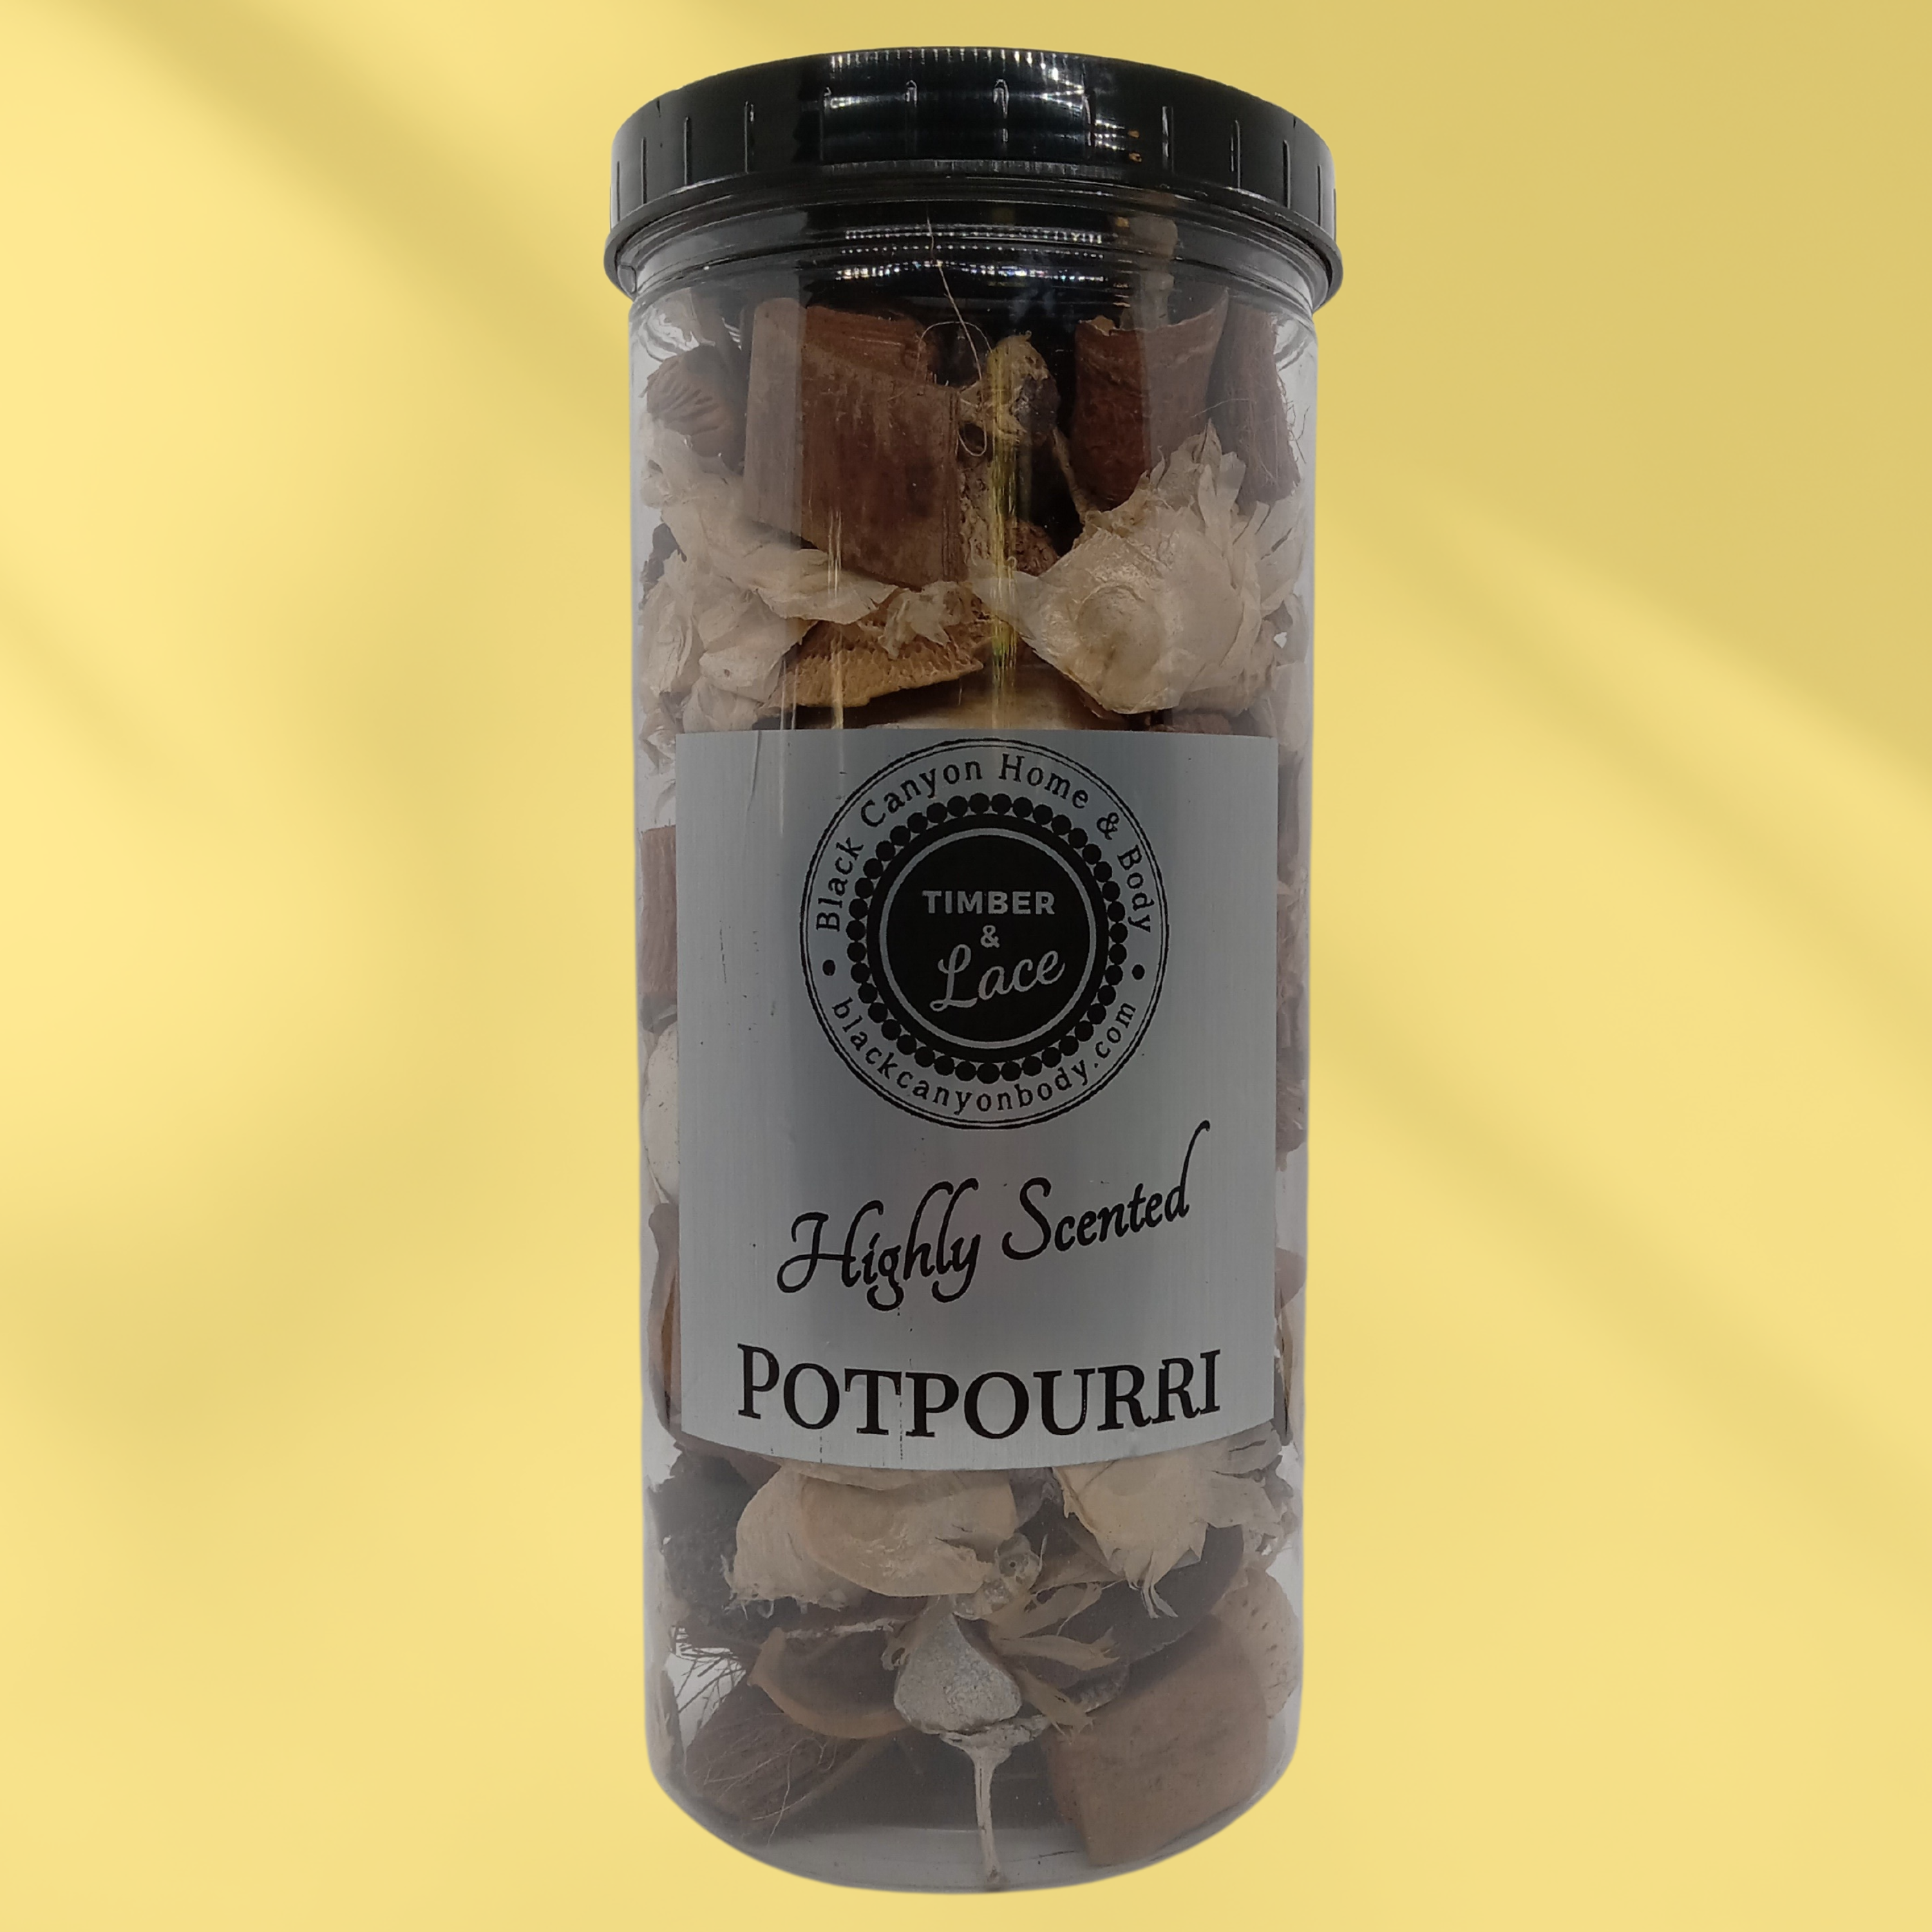 Timber & Lace Cookie Dough Scented Potpourri